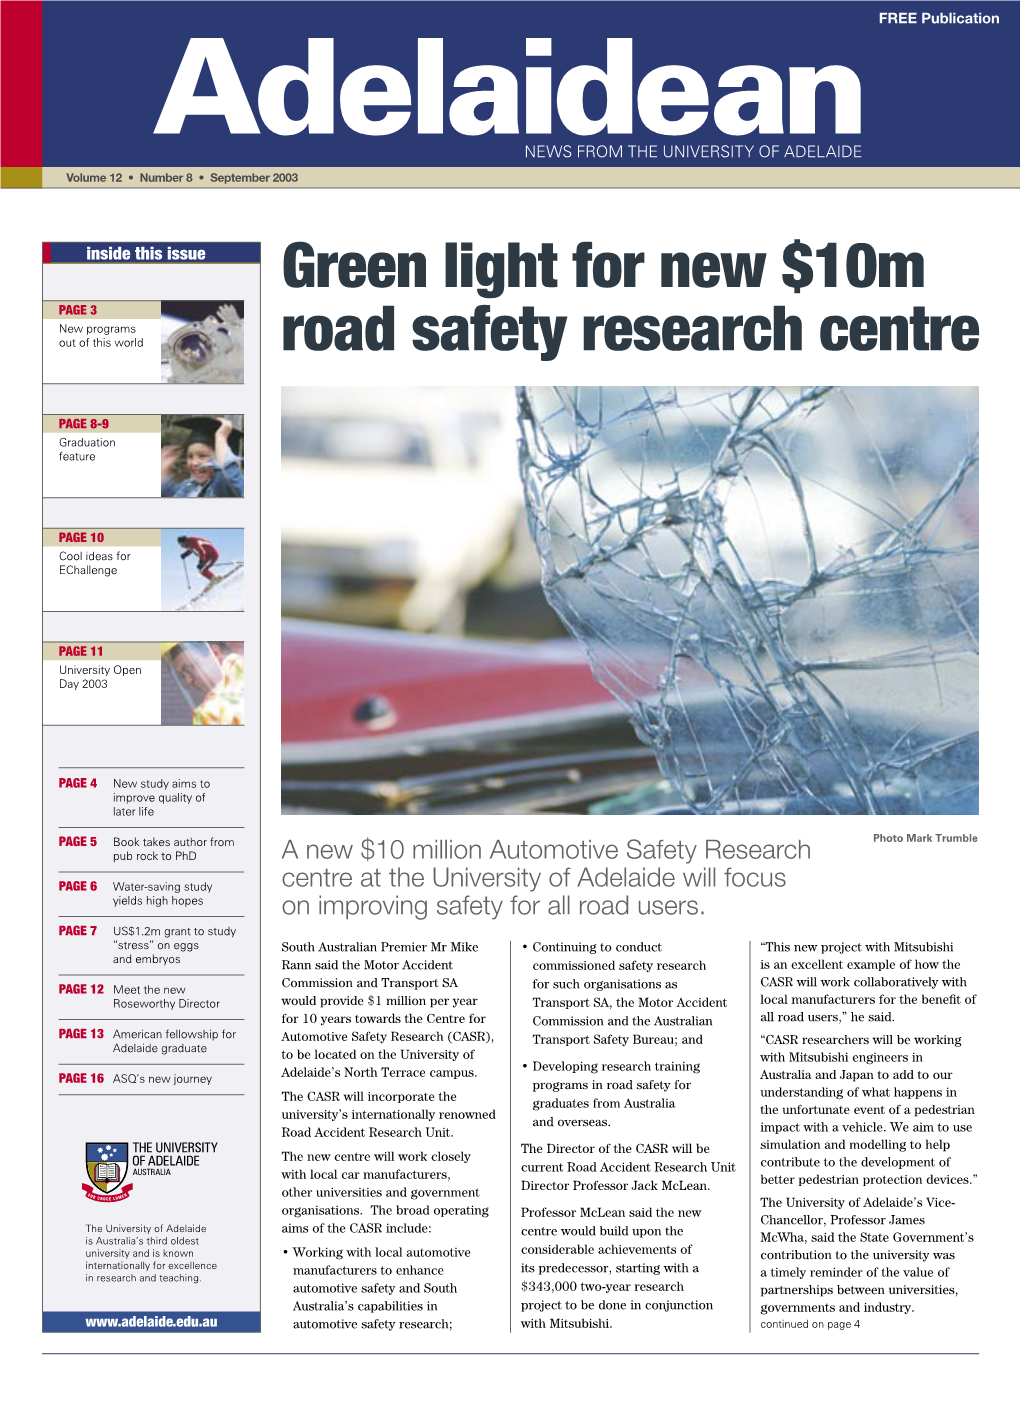 Green Light for New $10M Road Safety Research Centre